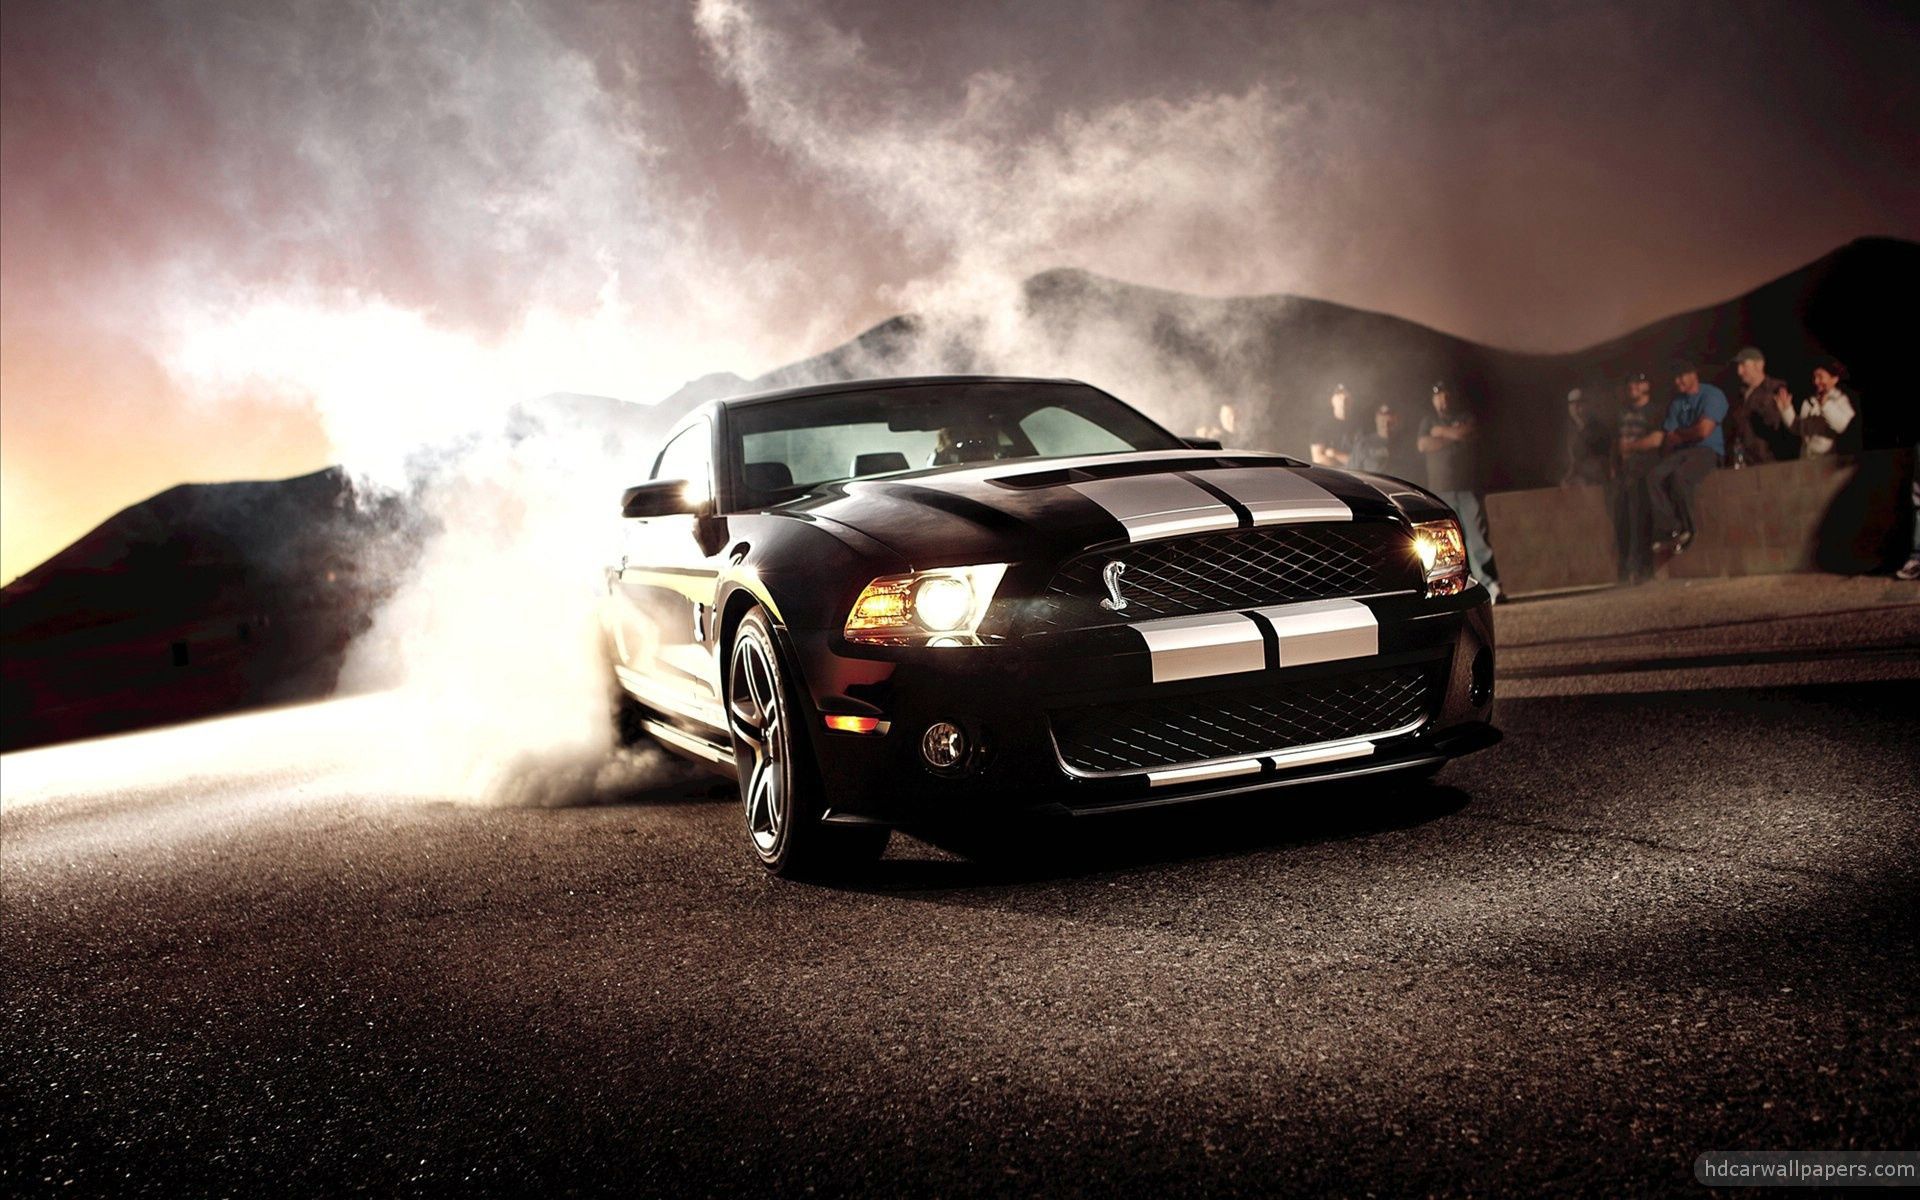 Ford Shelby GT500 2012 Wallpaper in 1920x1200 Resolution